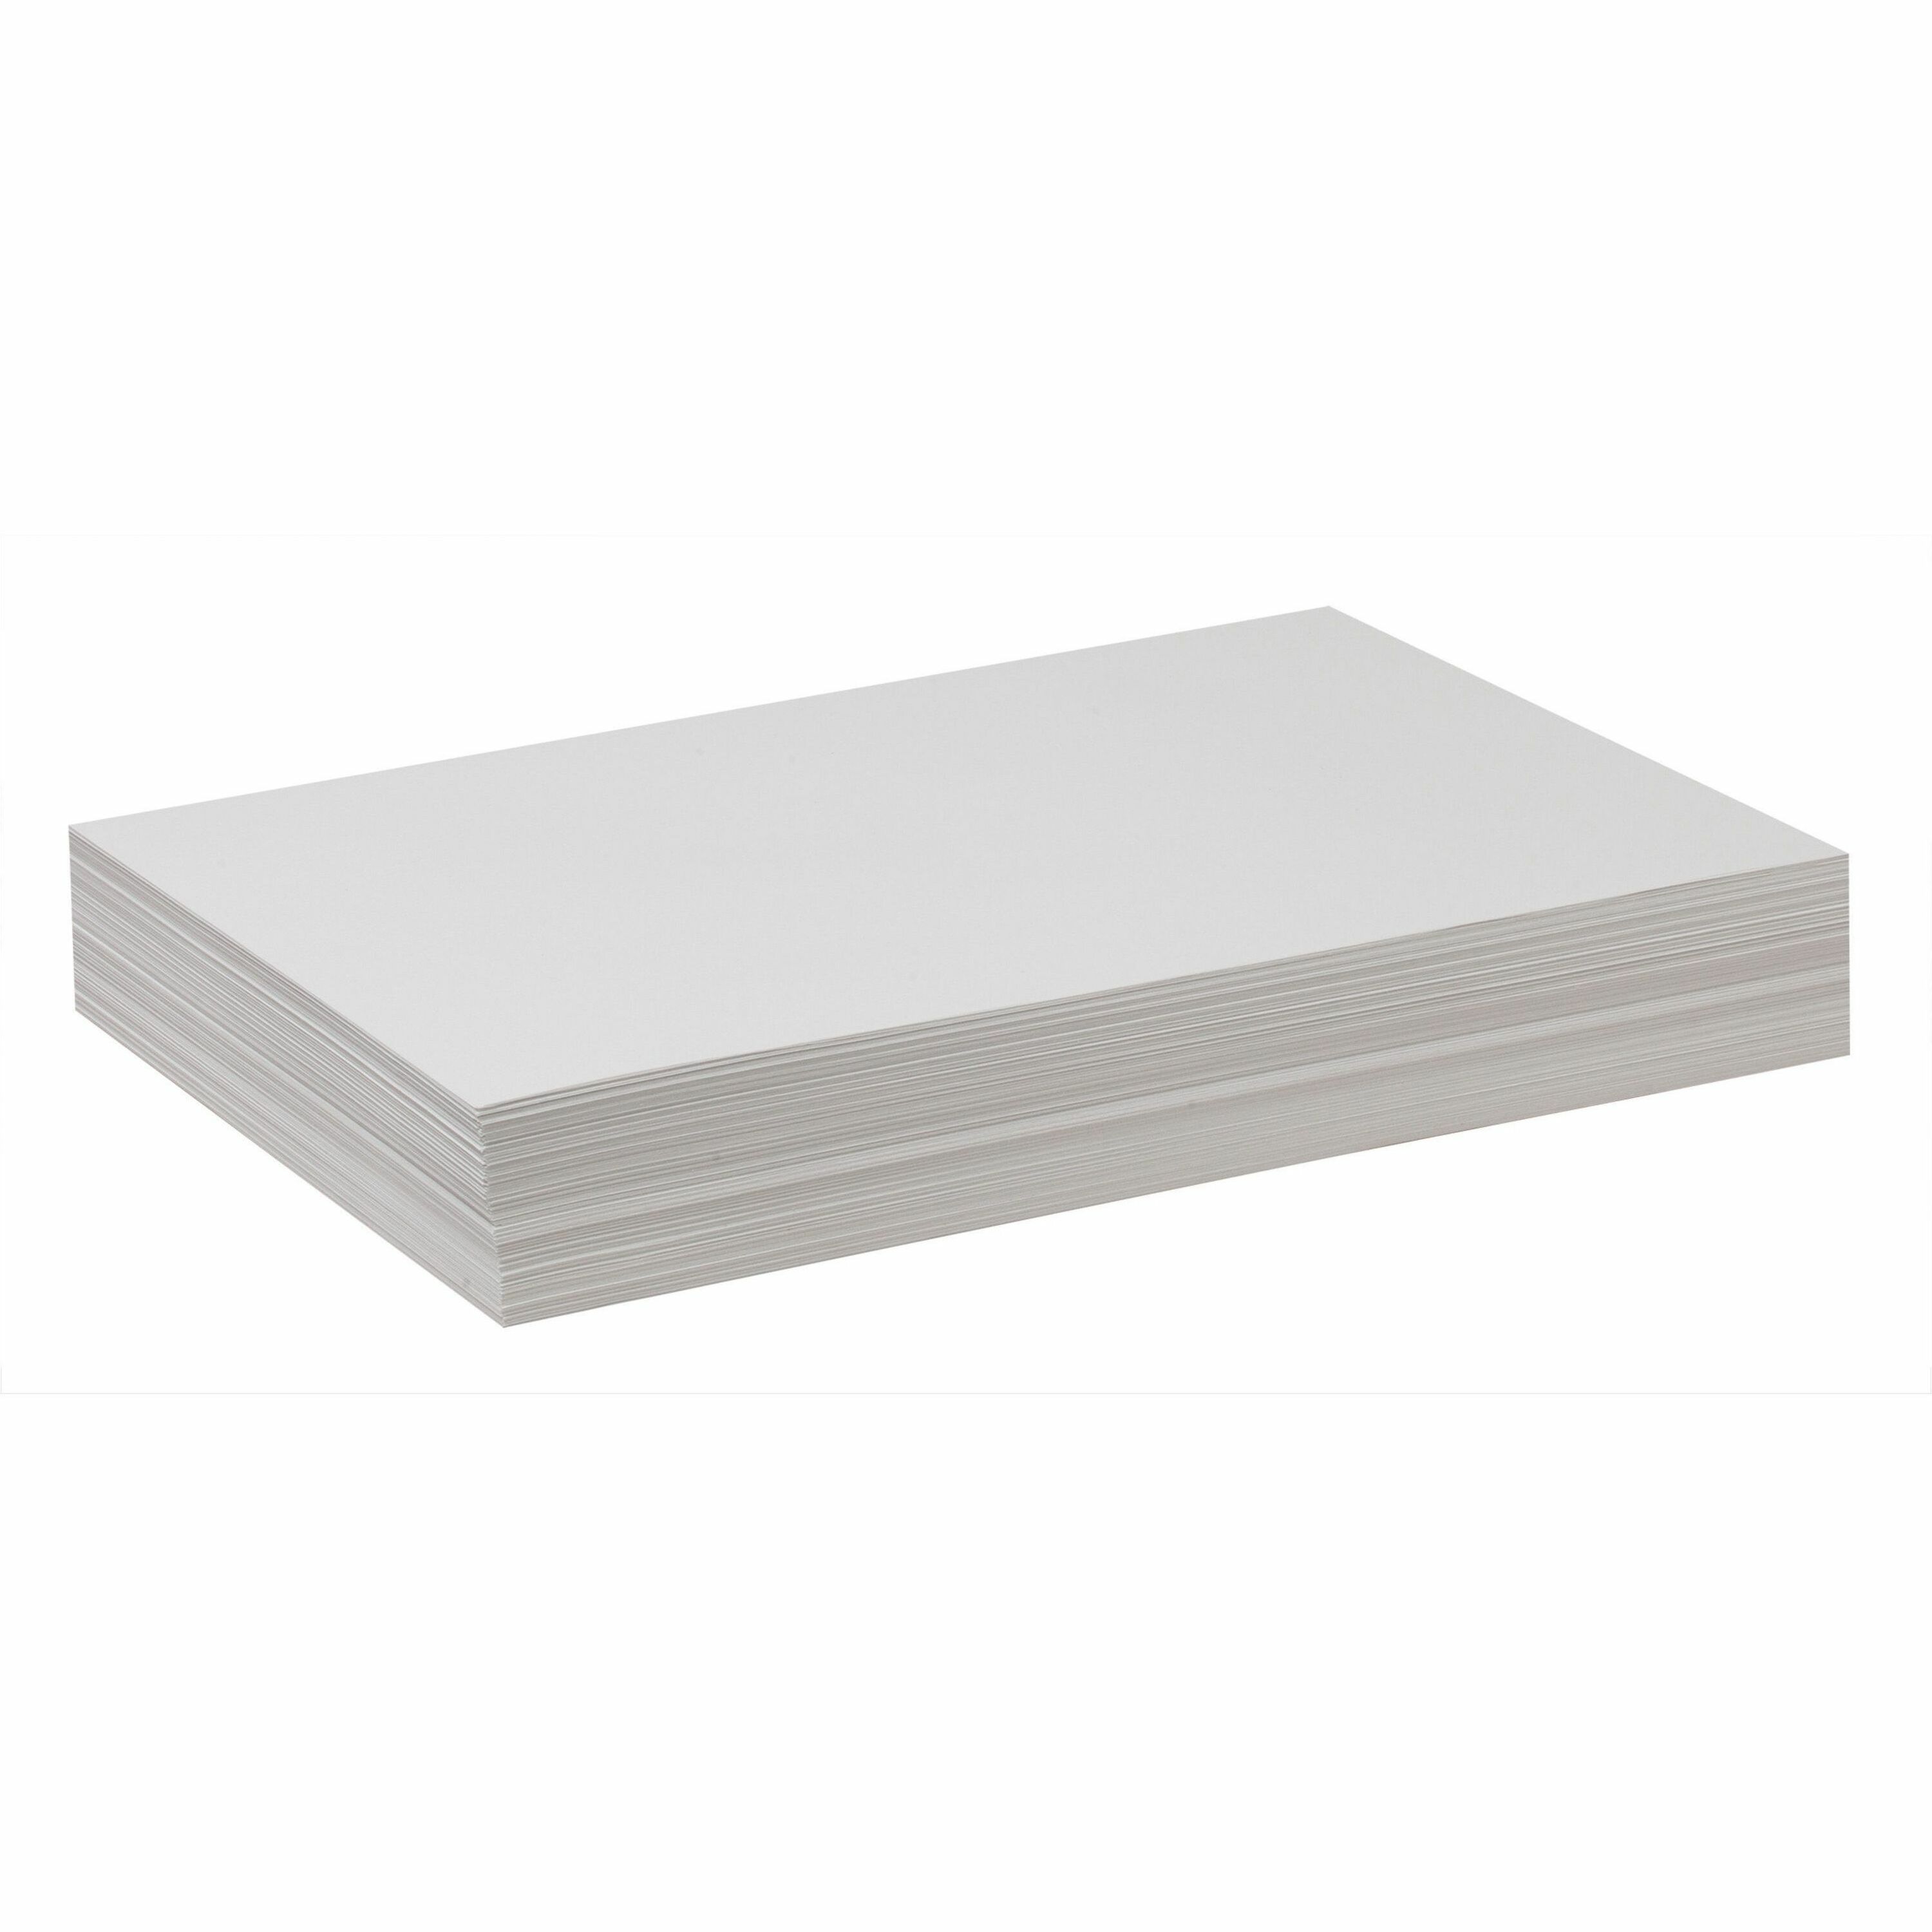 Pacon Plain White Newsprint Paper 12 x 18 Pack Of 500 Sheets